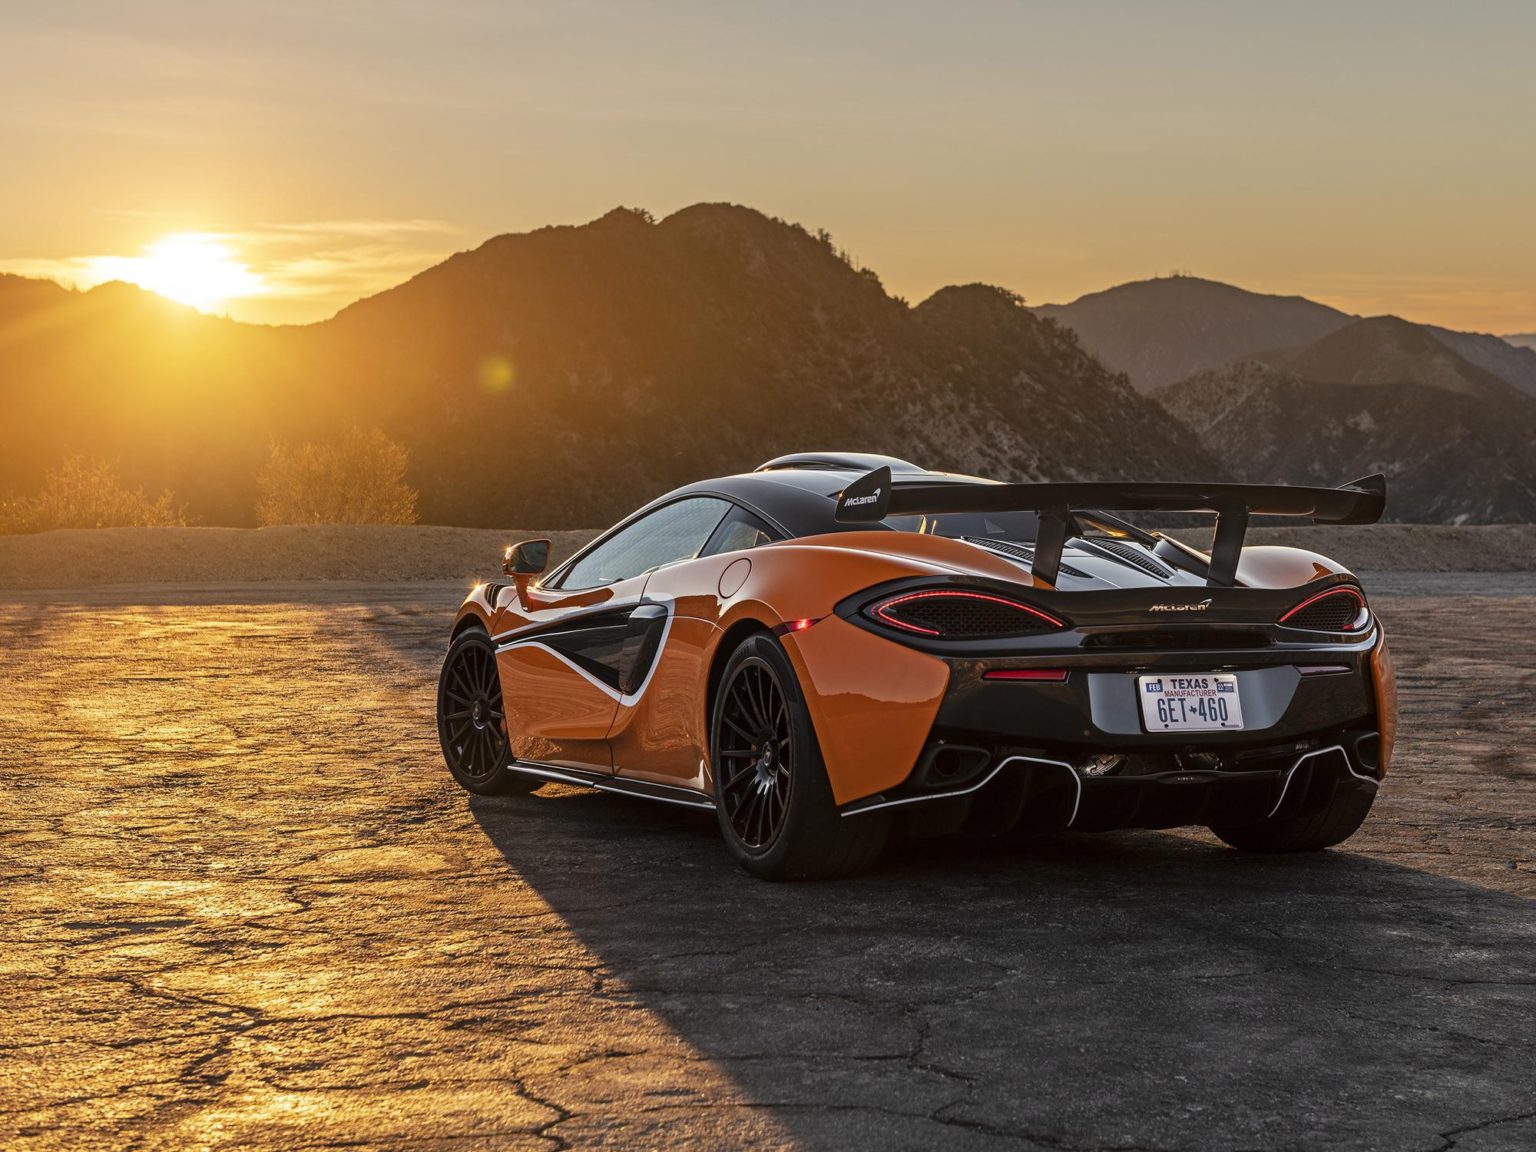 The final versions of the McLaren 620R have been delivered to the U.S.